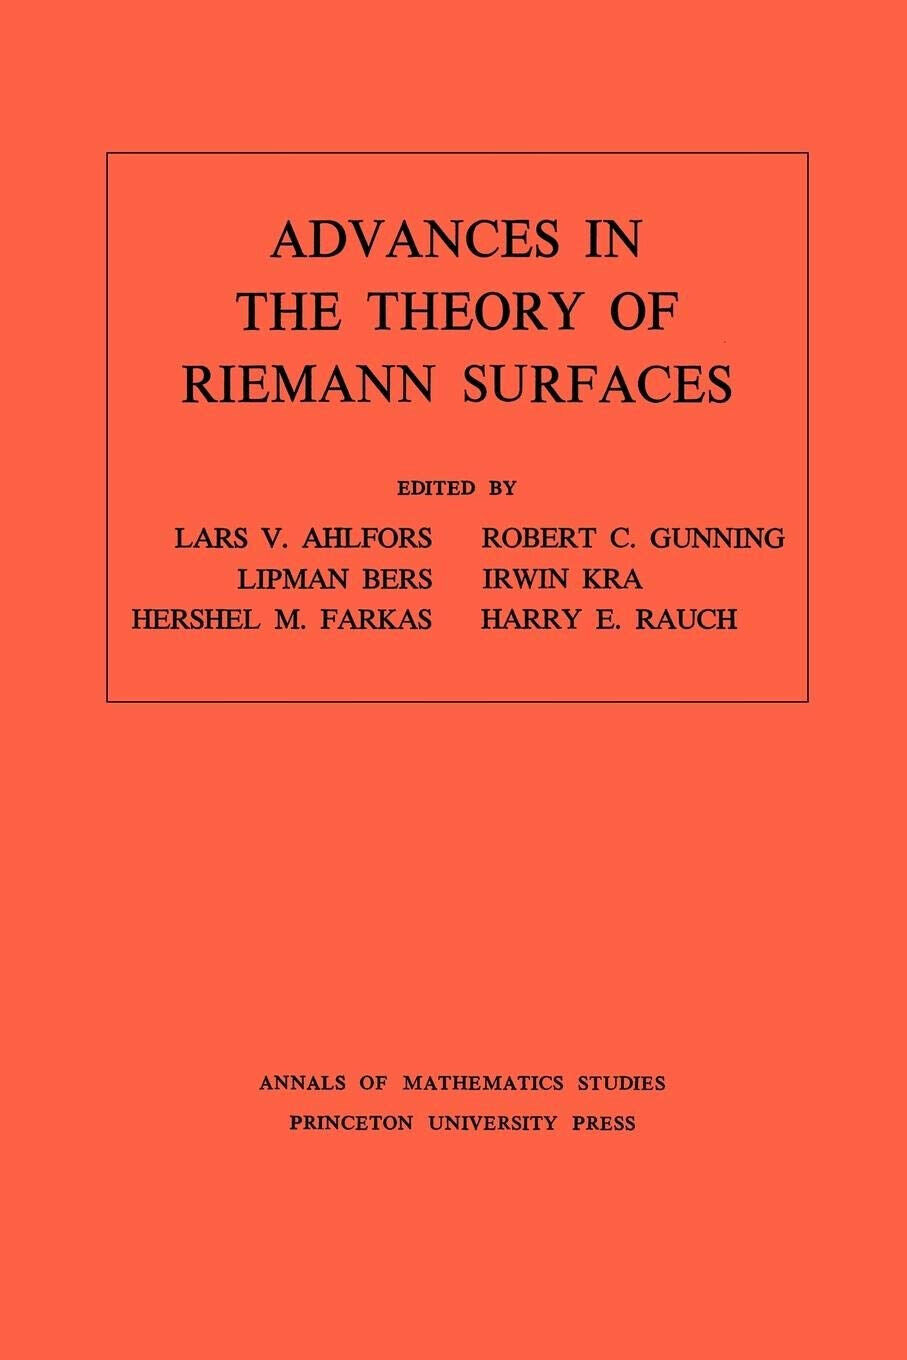 Advances in the Theory of Riemann Surfaces. (AM-66), Volume 66 - 2021 libro usato